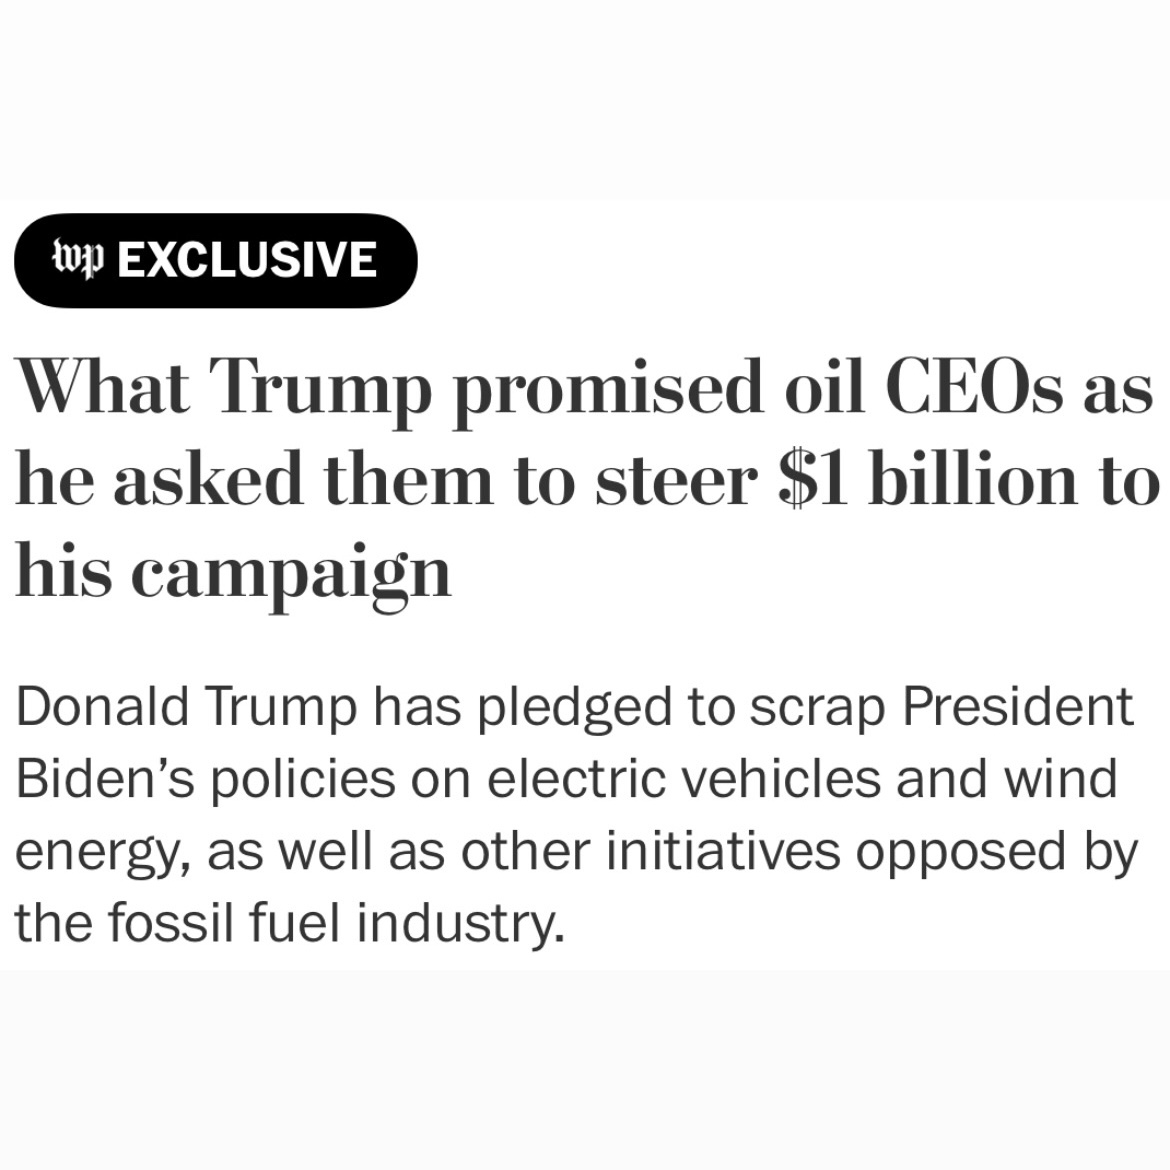 I'm still not over Trump promising fossil fuel CEOs that he'll reverse Biden's climate action in return for $1 billion. It's a bribe so outrageous it nearly defies belief—which is why he's paid so little political cost for these moves in the past. Can we change that dynamic?